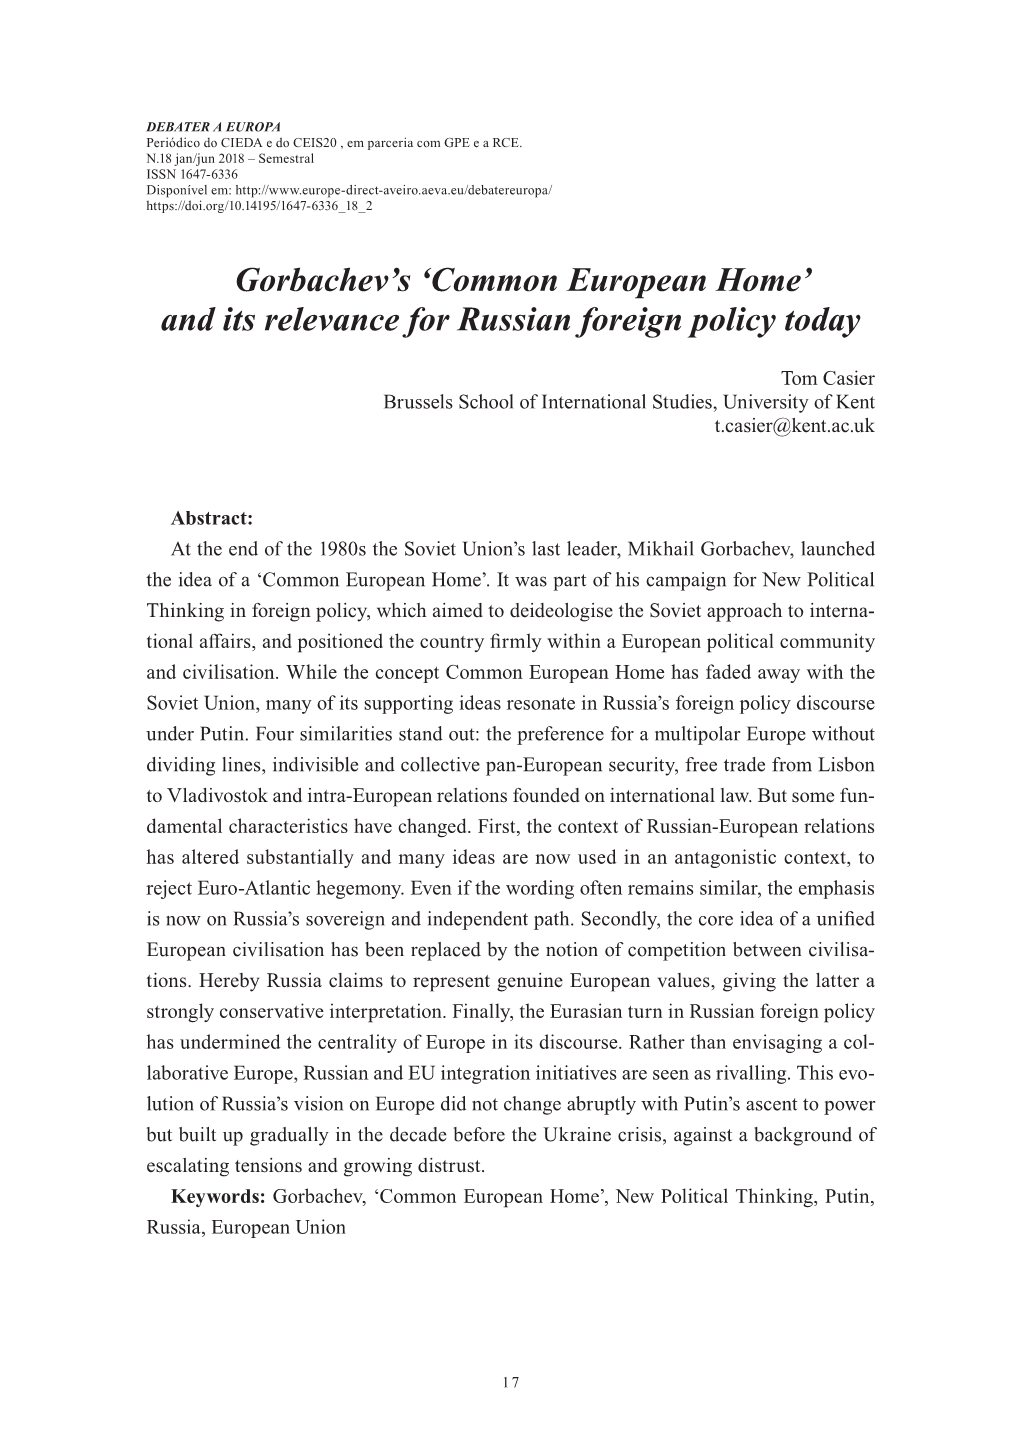 Gorbachev's 'Common European Home' and Its Relevance For